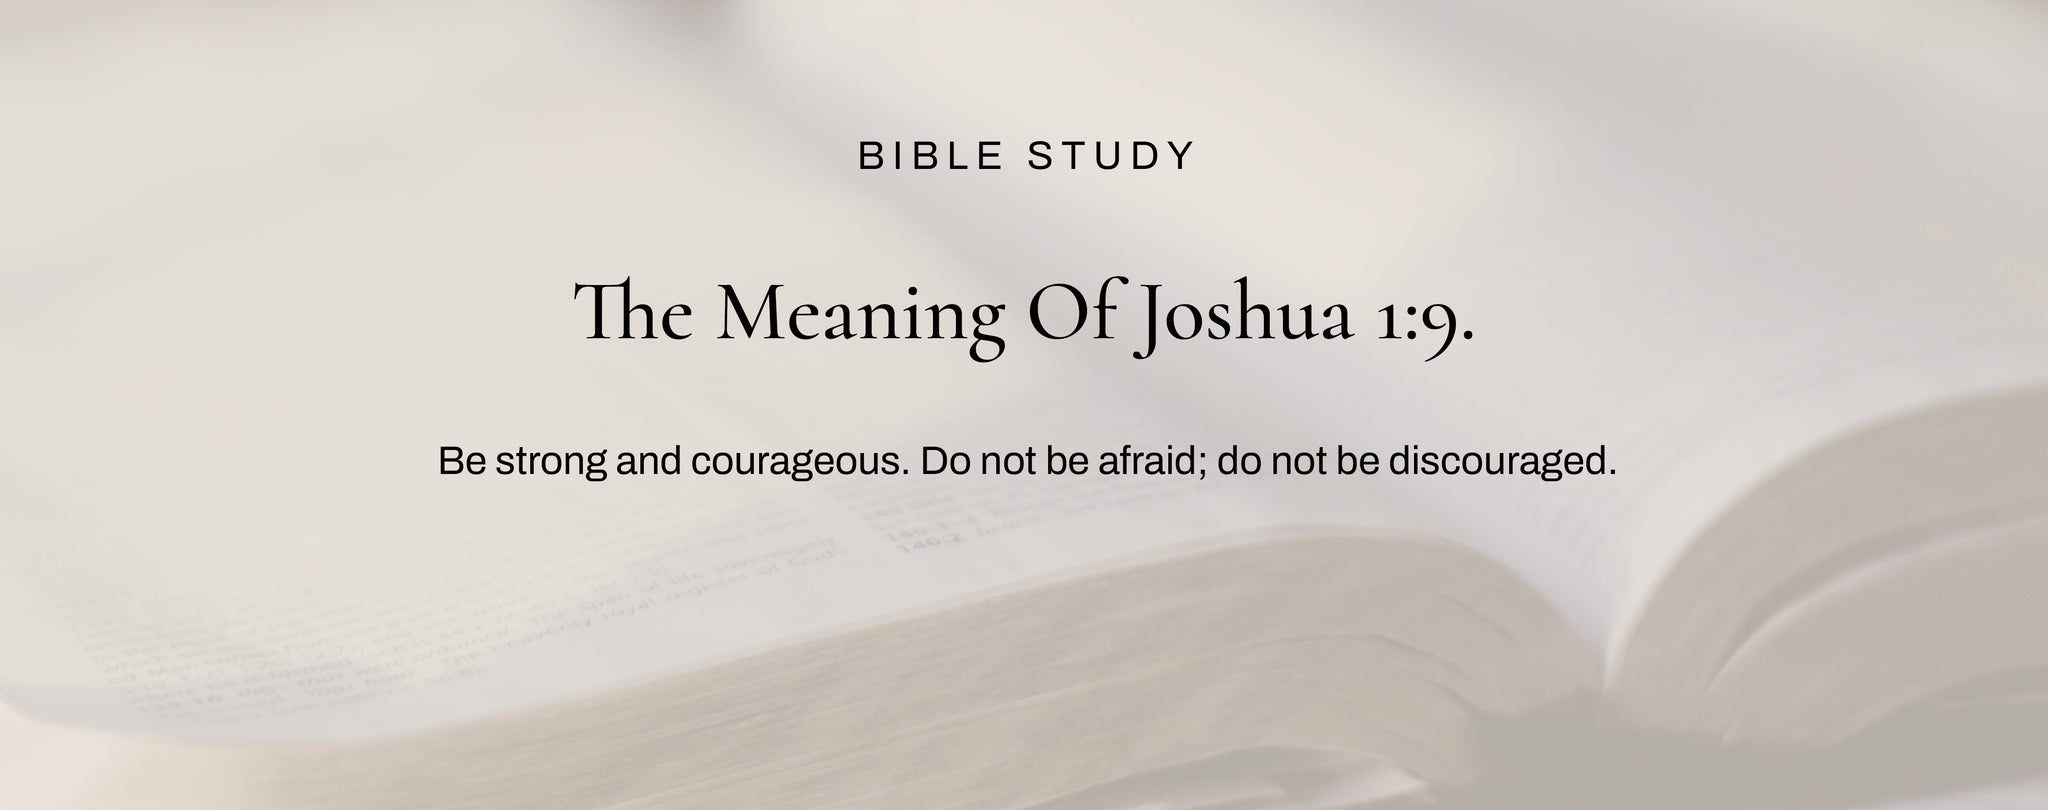 What Does Joshua 1:9 Mean?